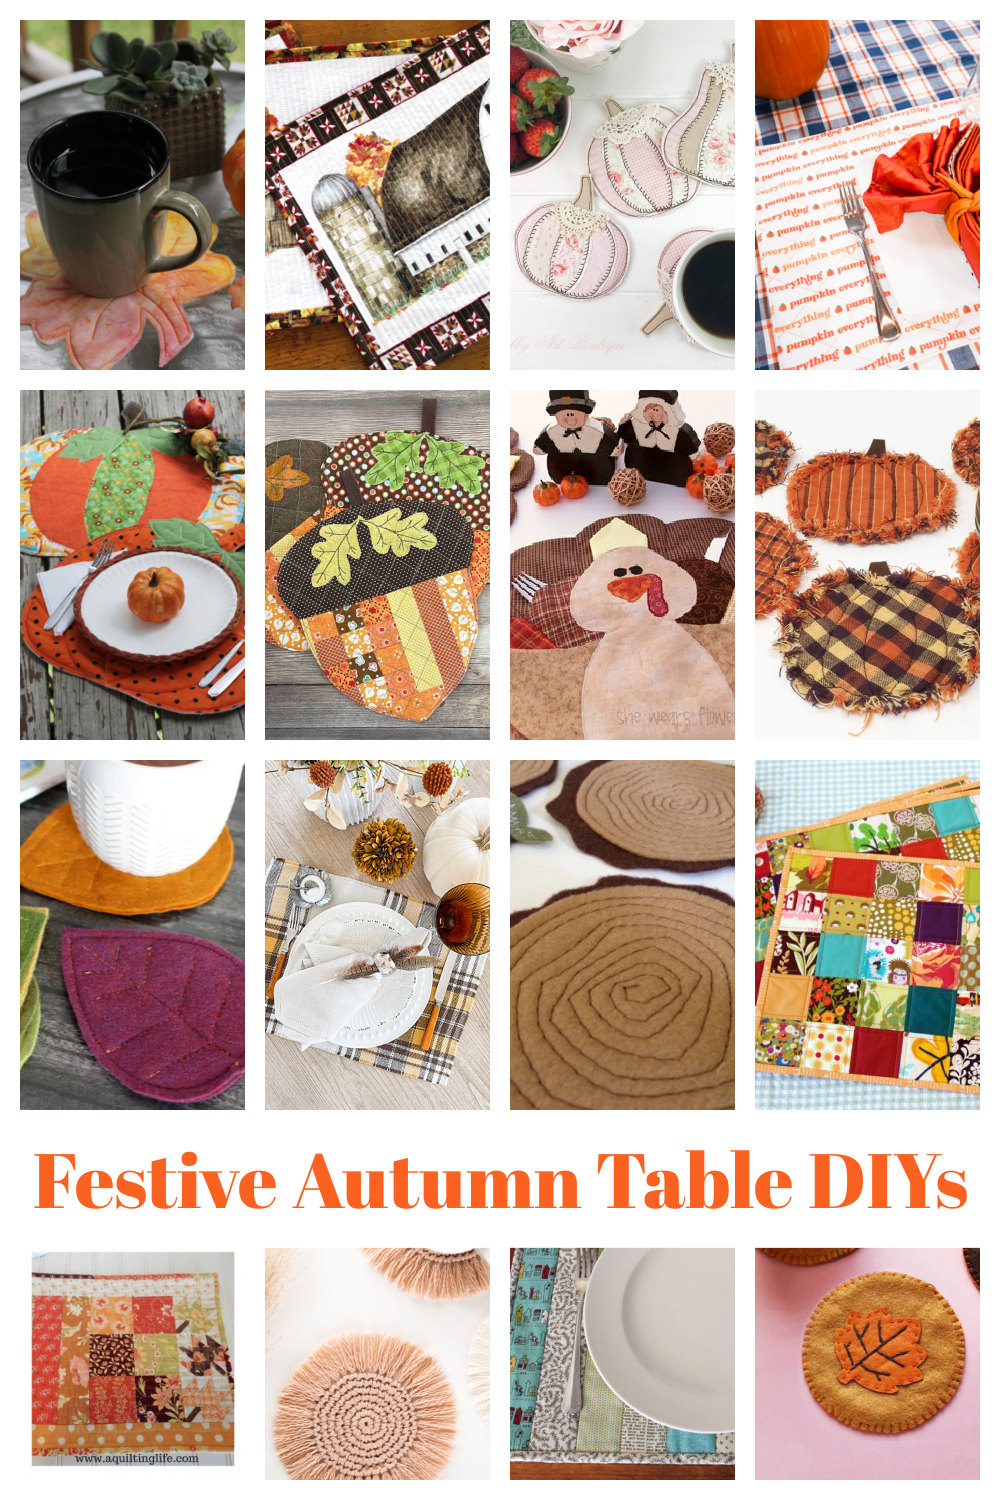 festive autumn table DIY projects to sew